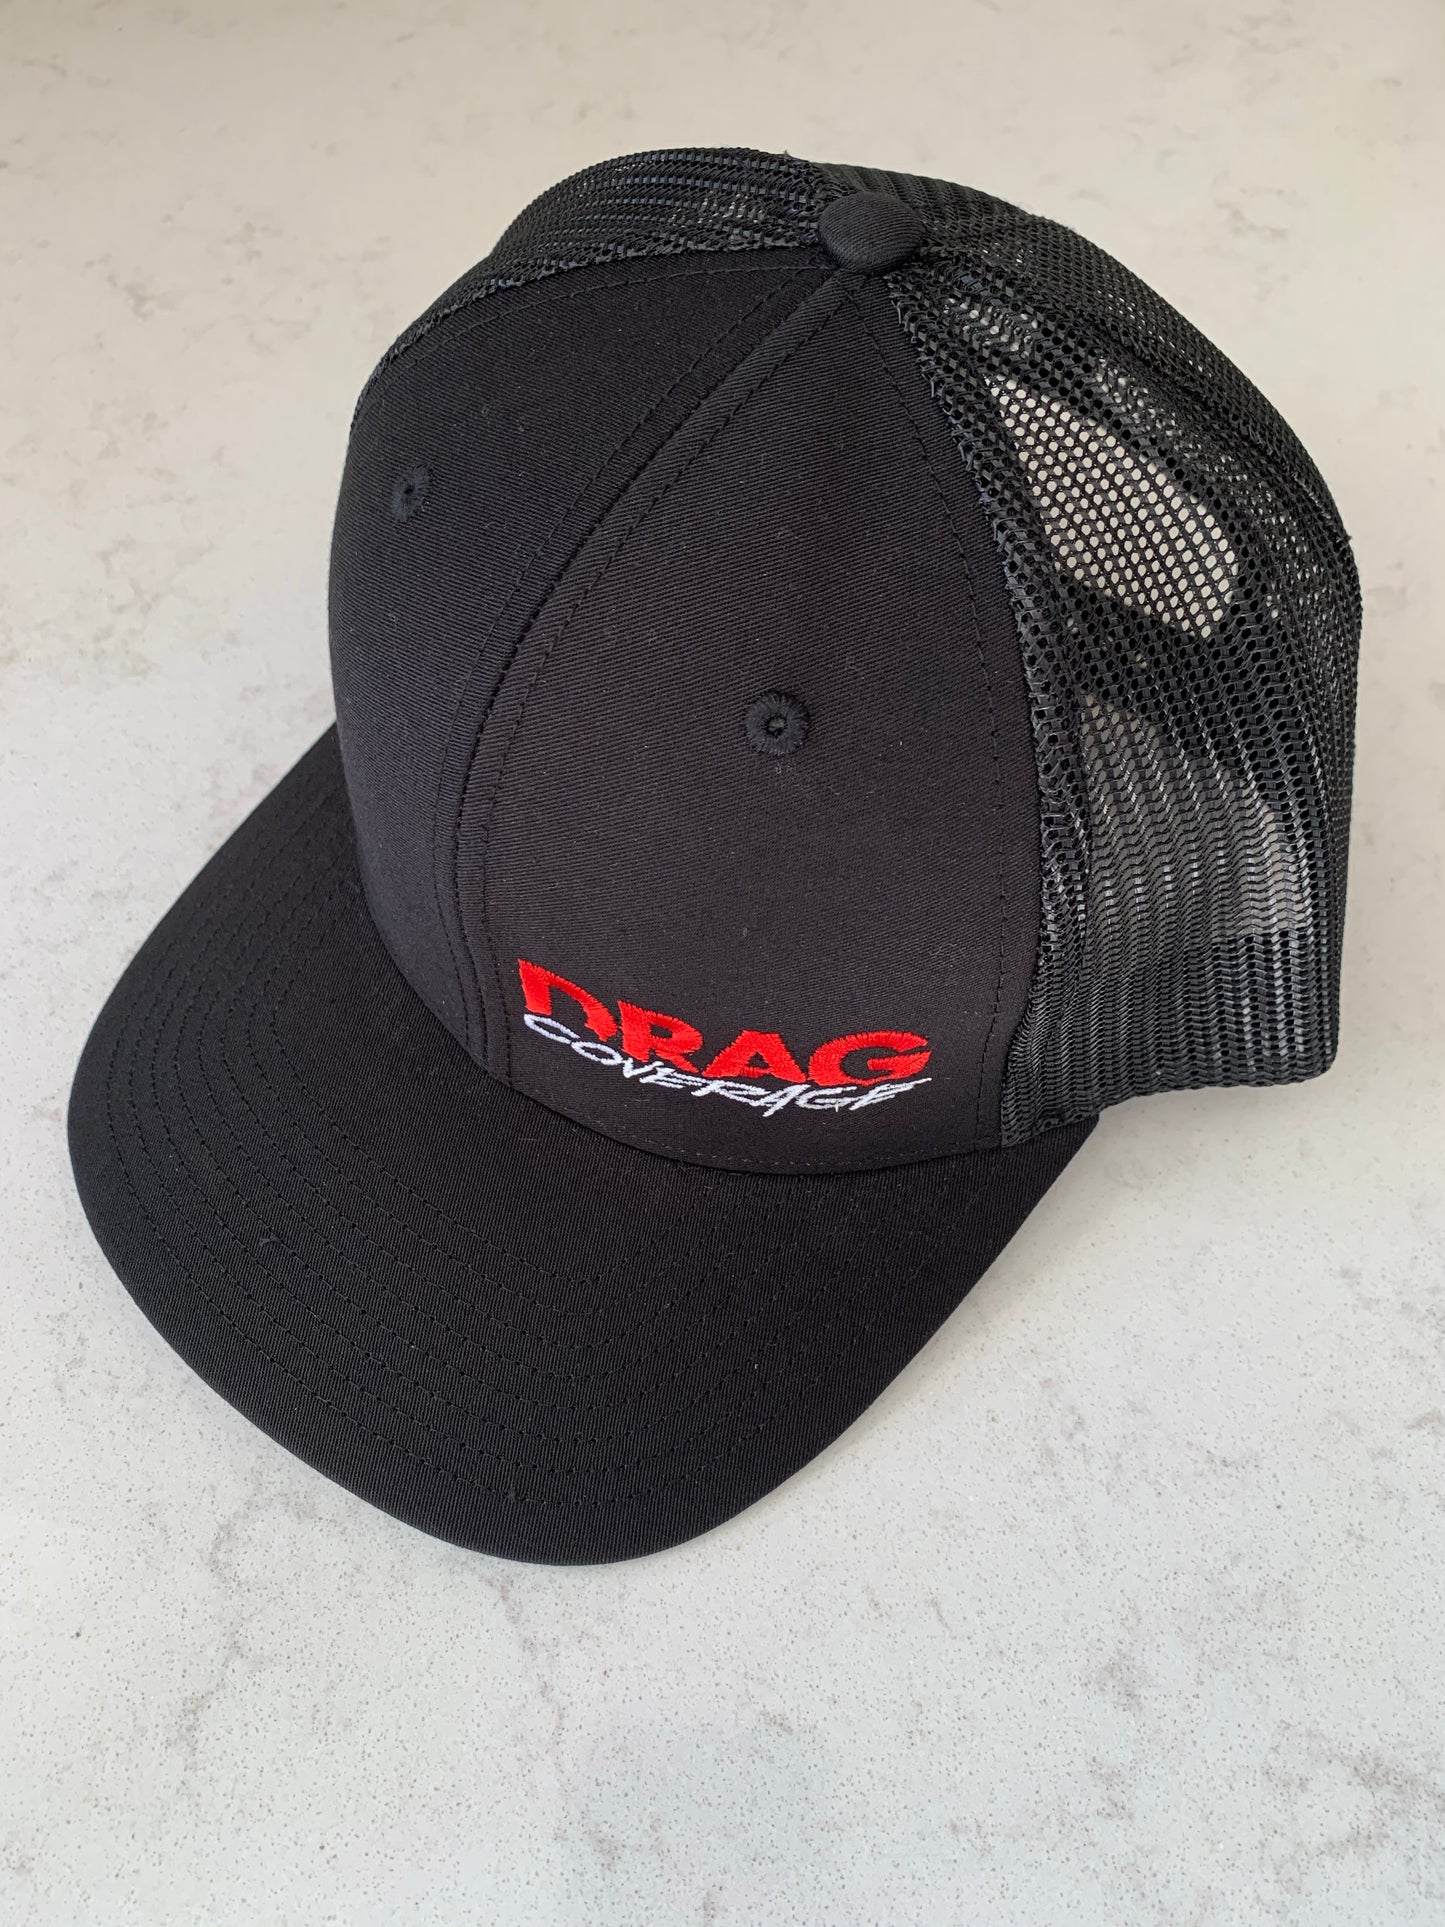 DragCoverage Trucker Hat - All Black with Logo